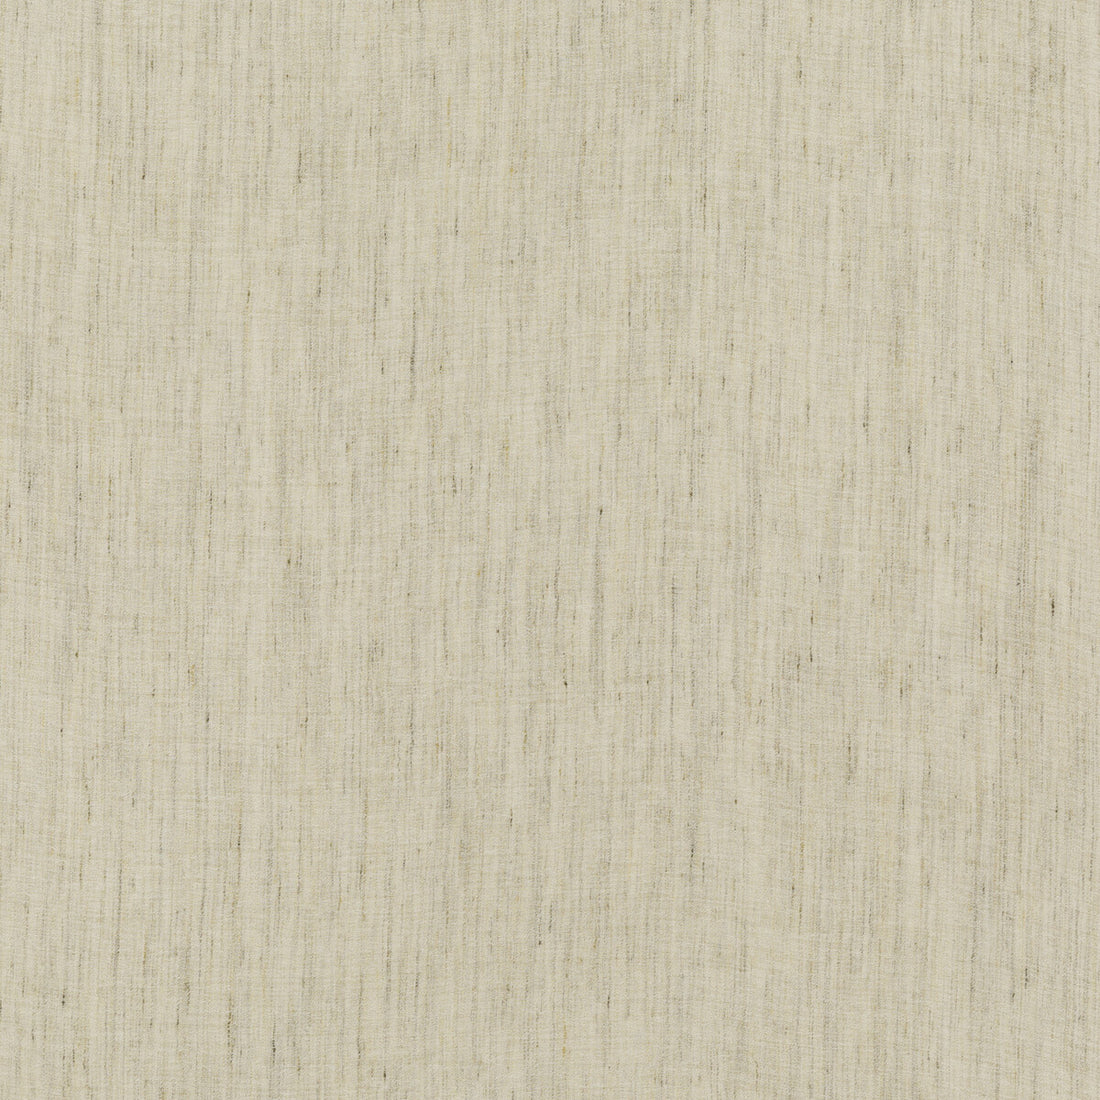 Atacama fabric in parchment color - pattern ED95014.118.0 - by Threads in the Meridian collection